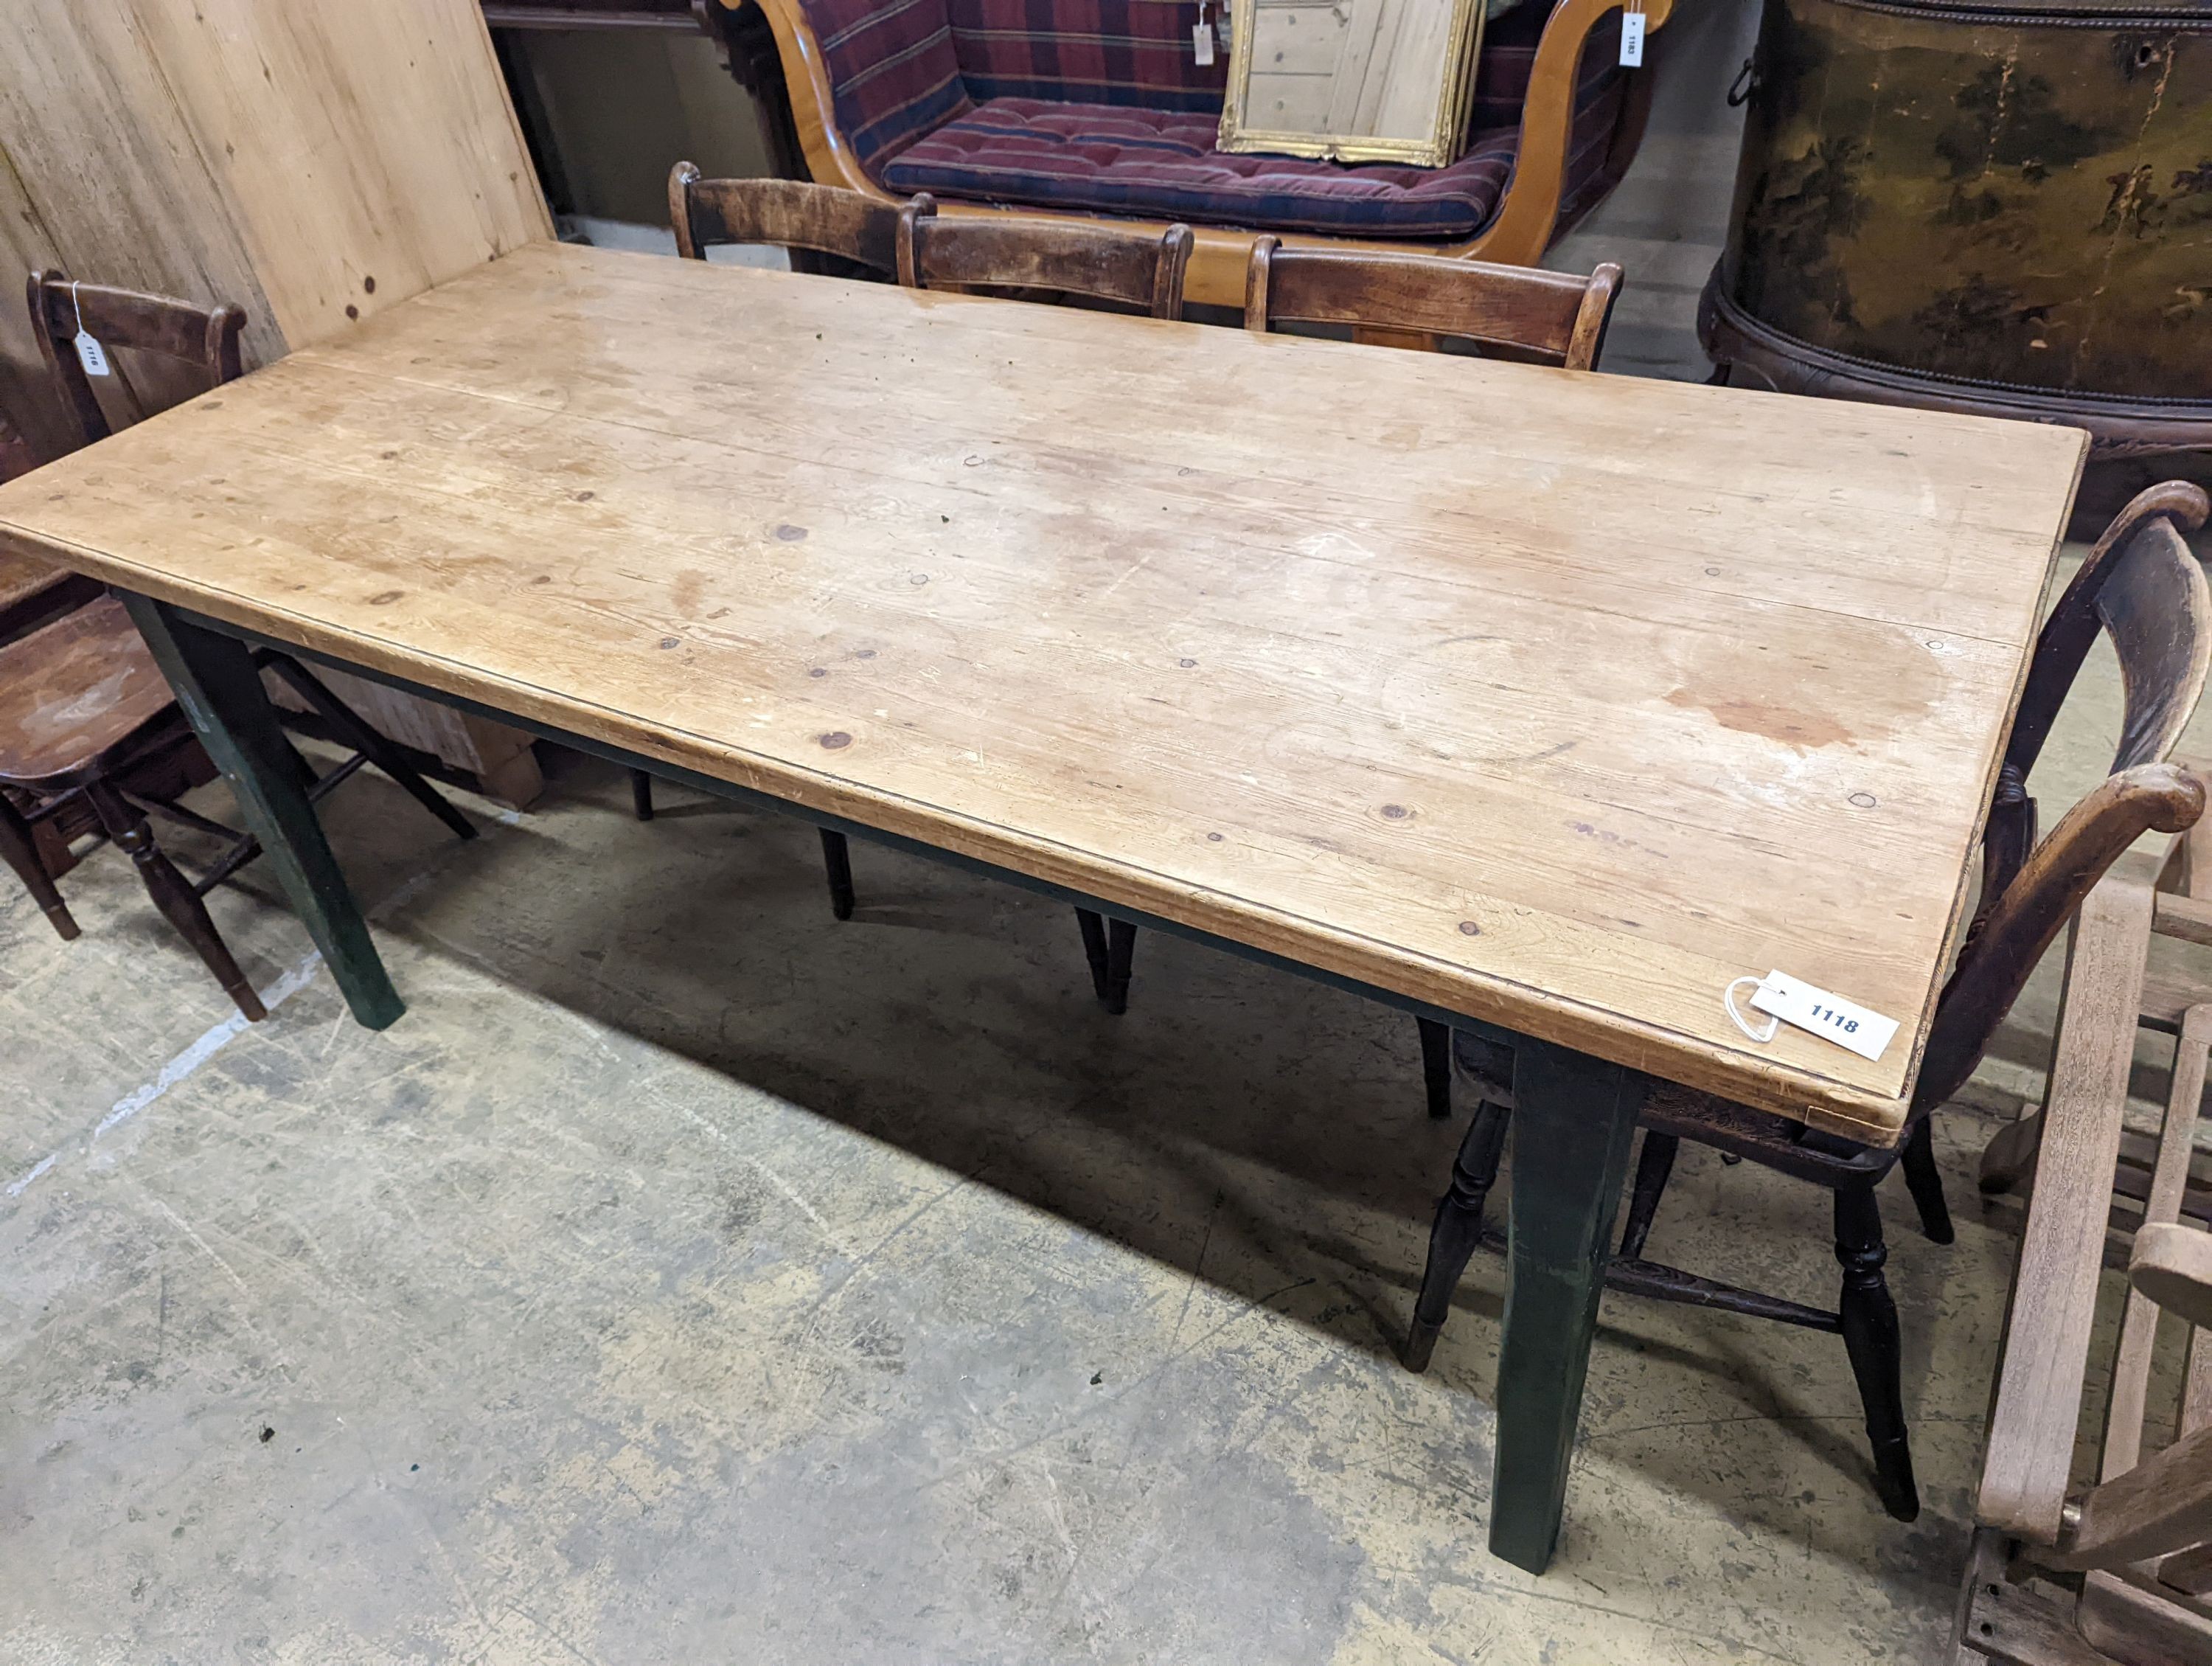 A rustic farmhouse pine kitchen table with painted legs, length 192cm, depth 85cm, height 76cm